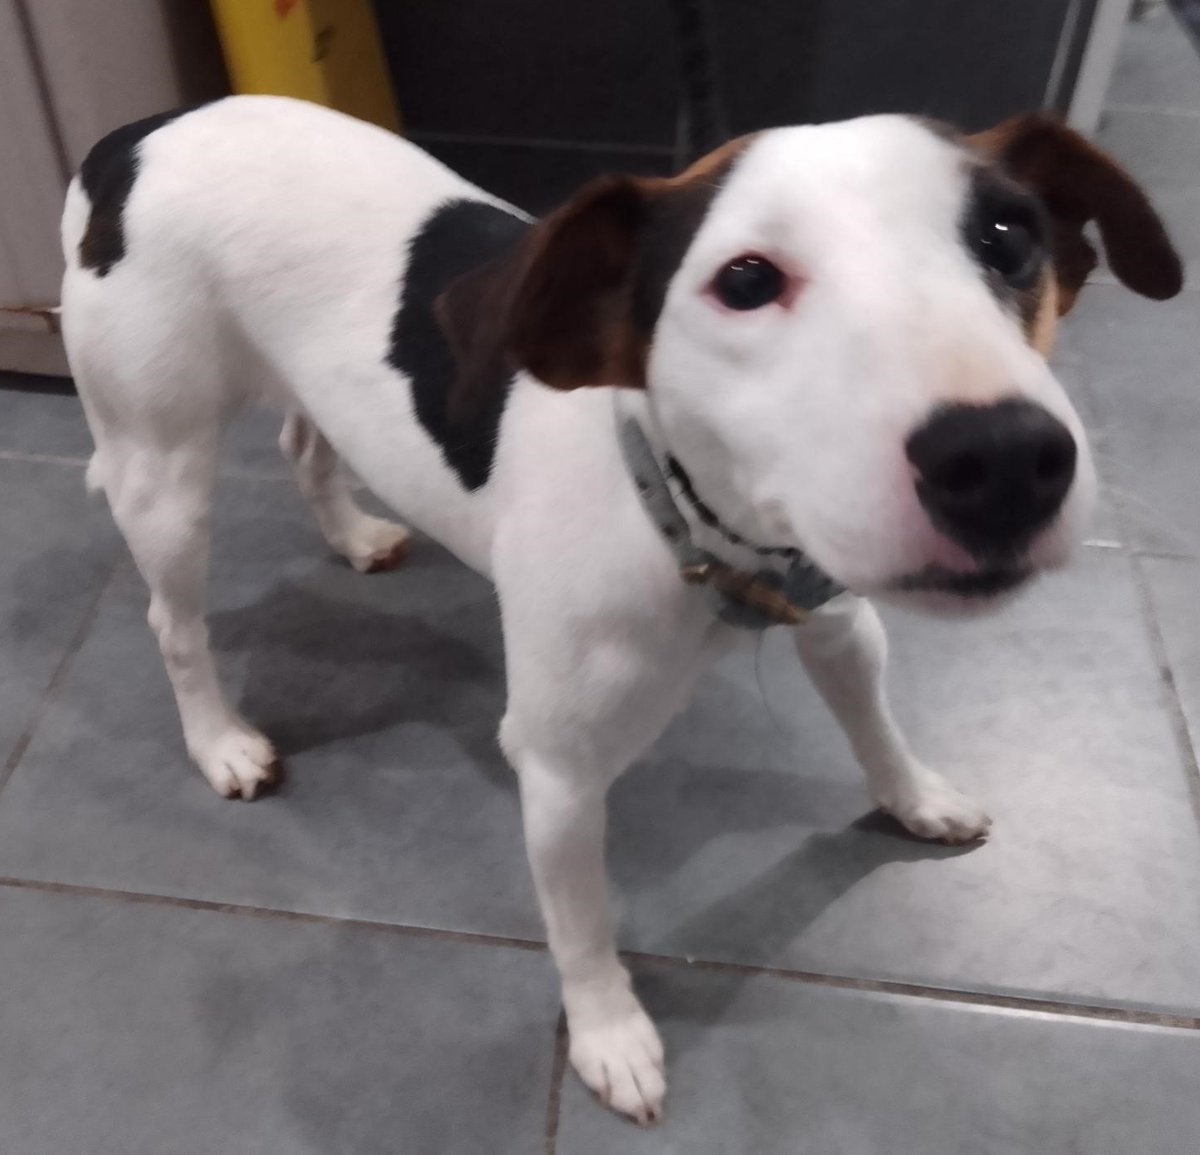 Please retweet to HELP FIND THE OWNERS OF THESE 2 STRAY DOGS FOUND #LONDON #UK Found 1 #HARROW small female terrier chip unregistered 2 #greenwich Jack Russell female no chip Now in council pounds for 7 days. They could be missing/stolen from other regions. Please share…